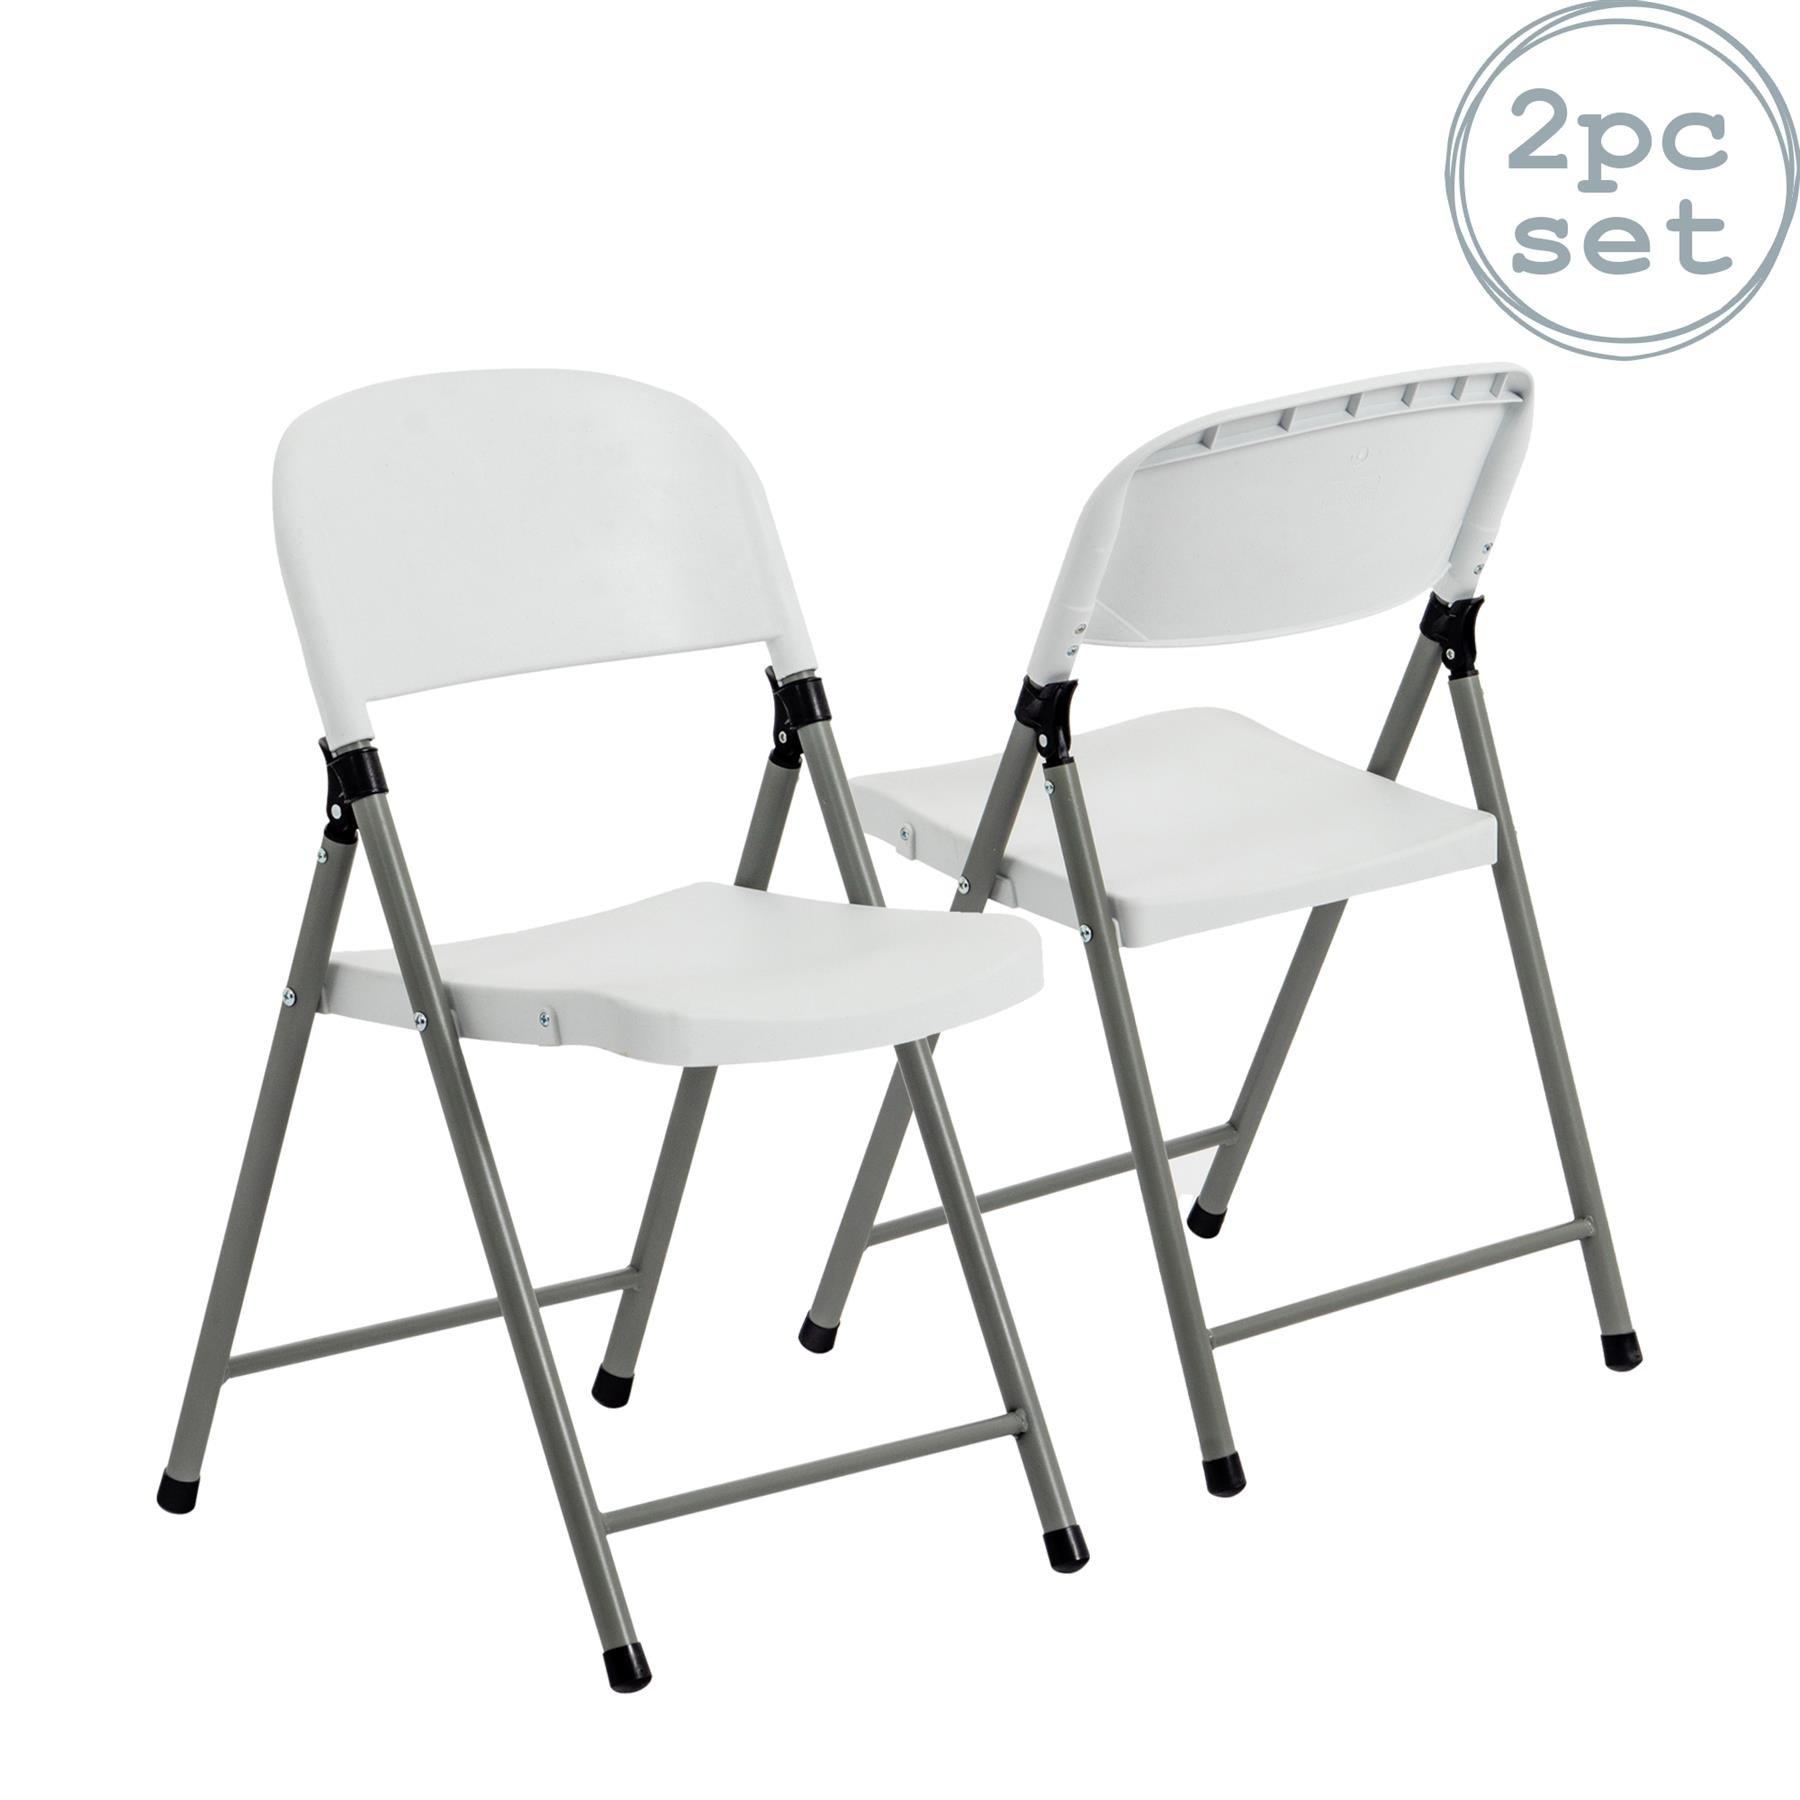 Folding Trestle Chairs White Pack of 2